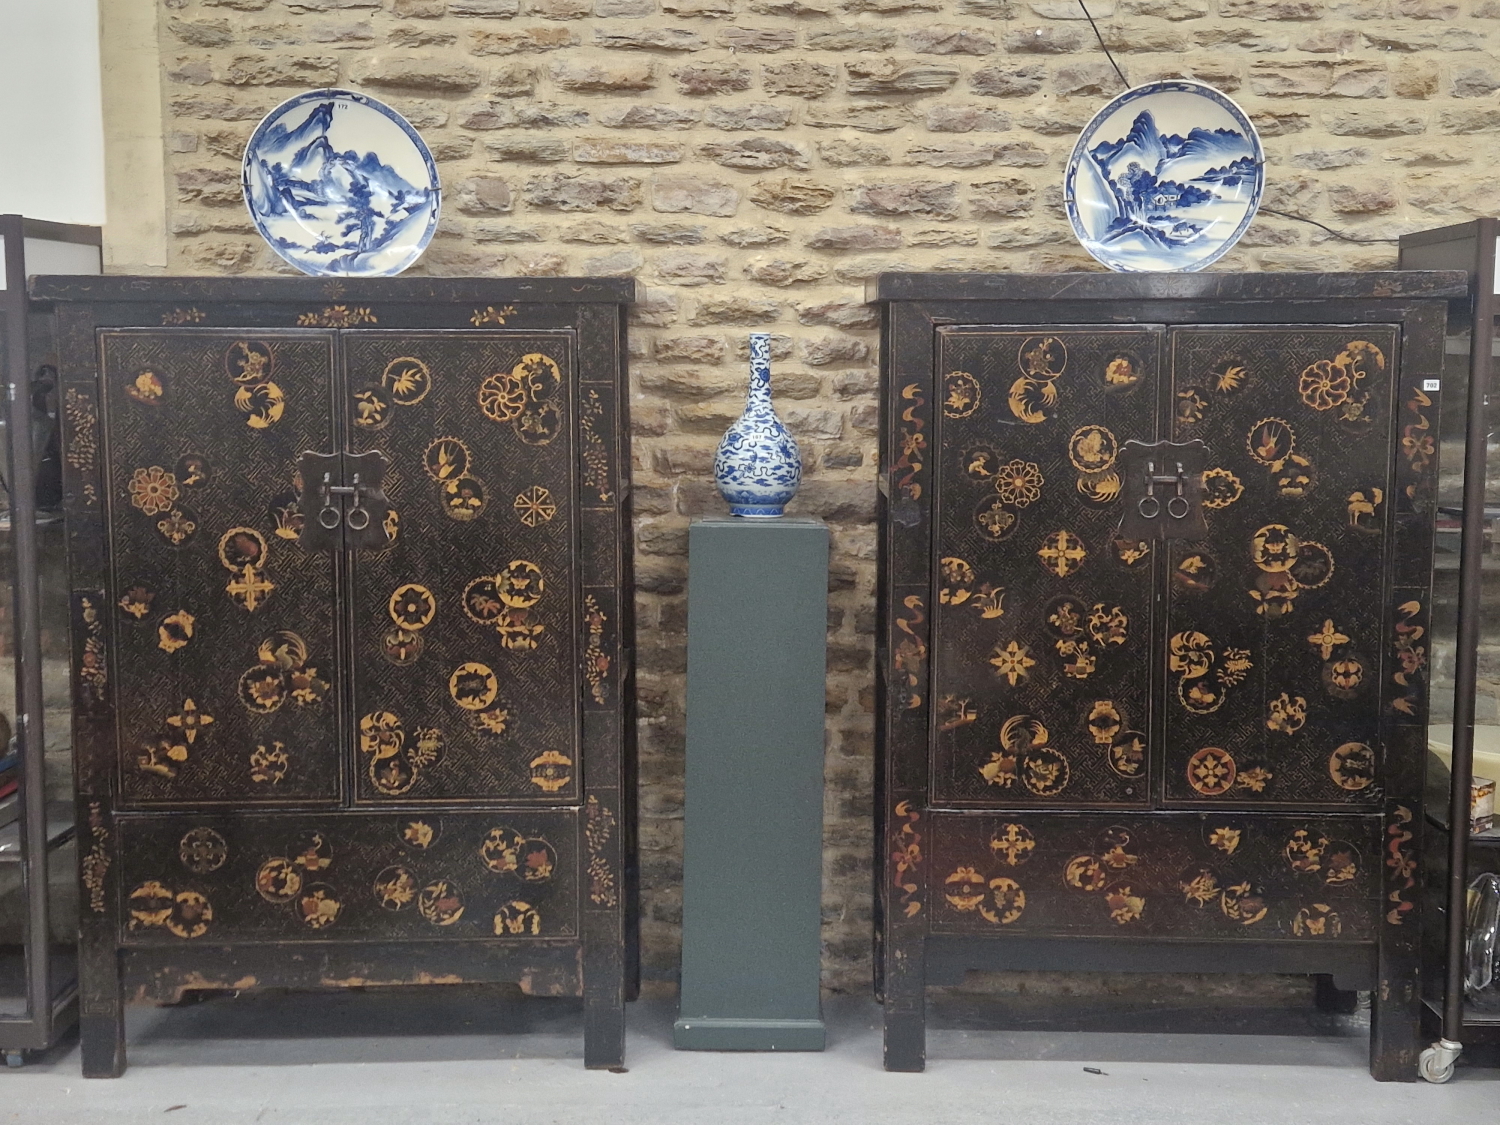 A PAIR OF CHINESE BLACK LACQUERED CABINETS, THE DOORS GILT WITH ROUNDELS ON A GEOMETRIC GROUND AND